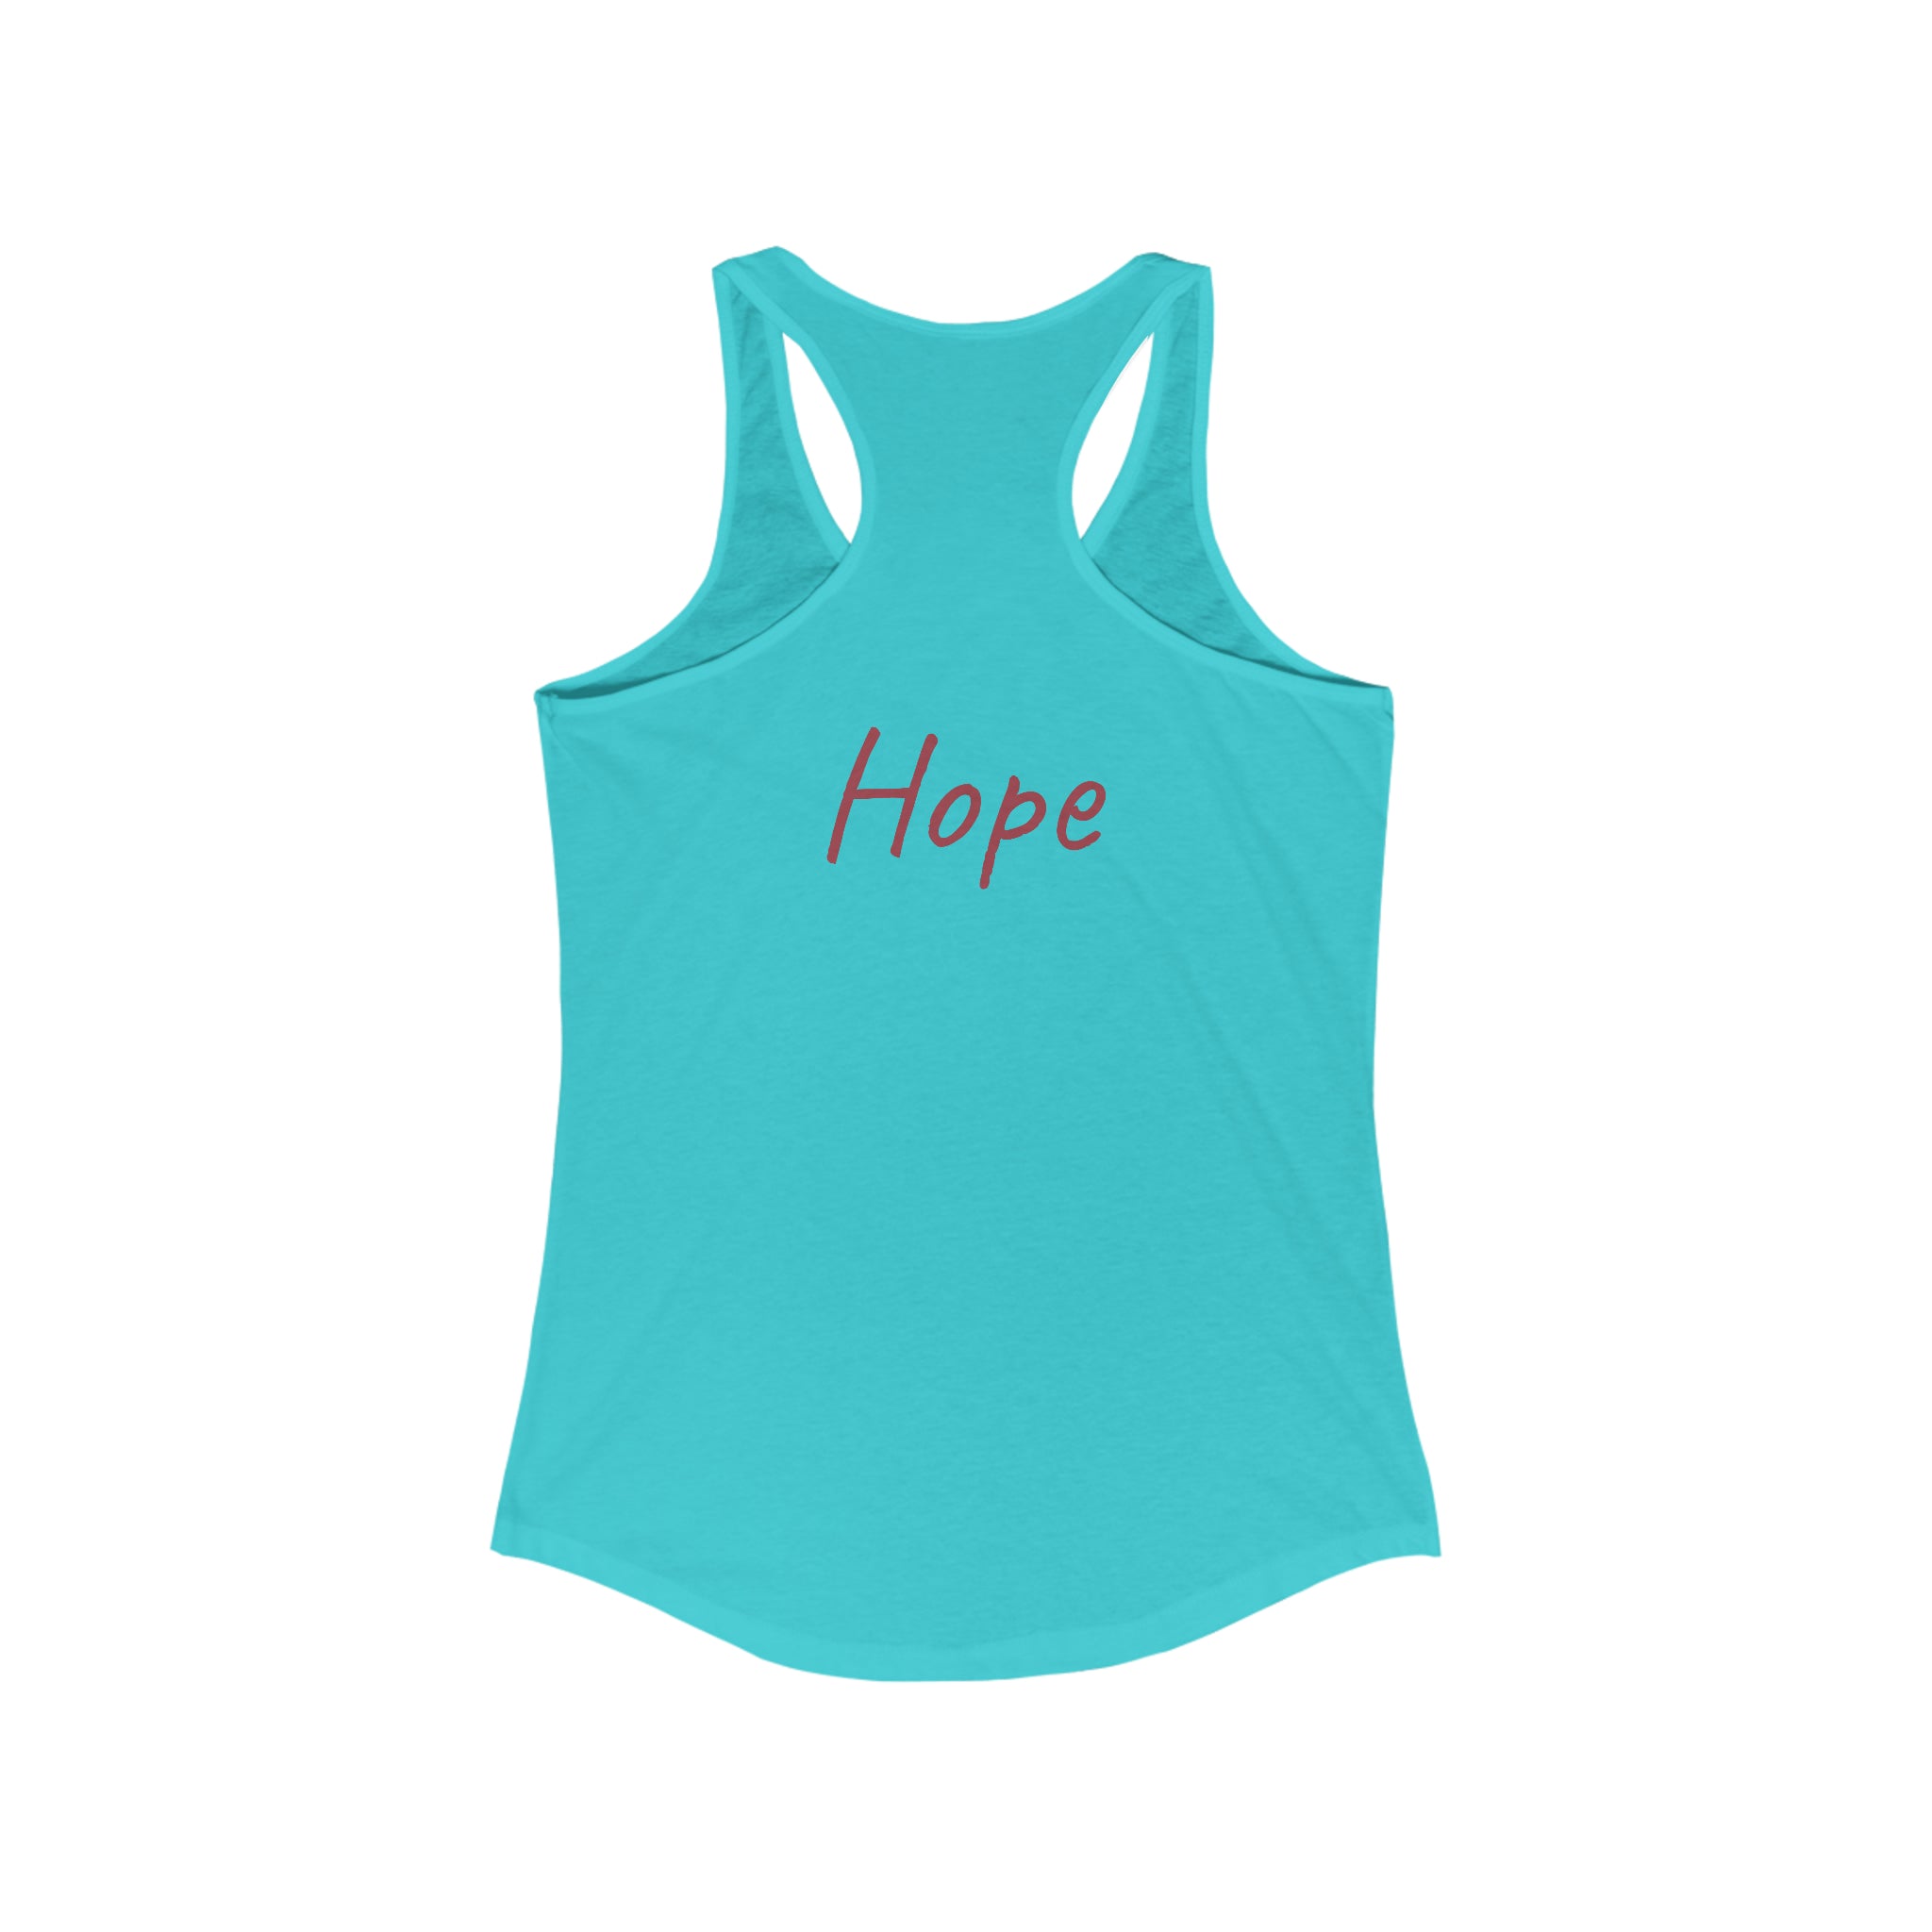 Hope Tank Top: Join the Movement! Solid Tahiti Blue Activewear Athletic Tank Gym Clothes Performance Tank Racerback Sleeveless Top Sporty Apparel Tank Top Women's Tank Workout Gear Yoga Tank Tank Top 14267819847860474366_2048_c0712e6a-0cd6-42a3-b3e4-491c064be9e1 Printify